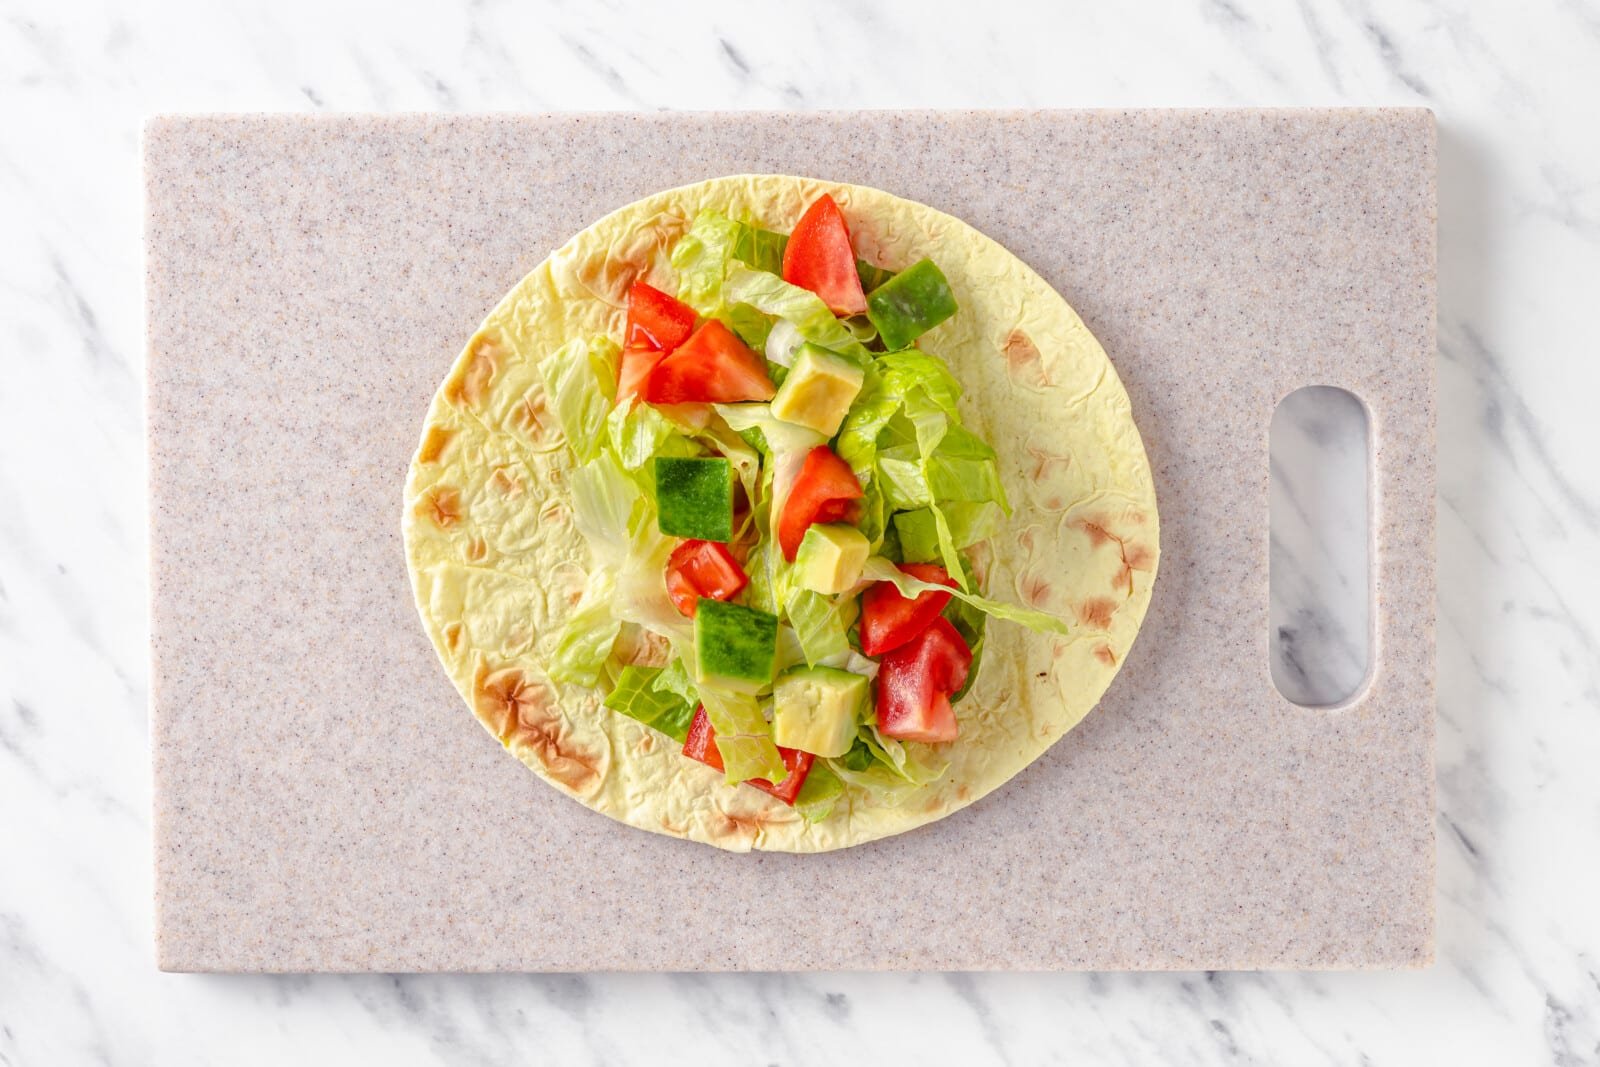 taco being put together with avocado tomato and lettuce in a tortilla on a cutting board.